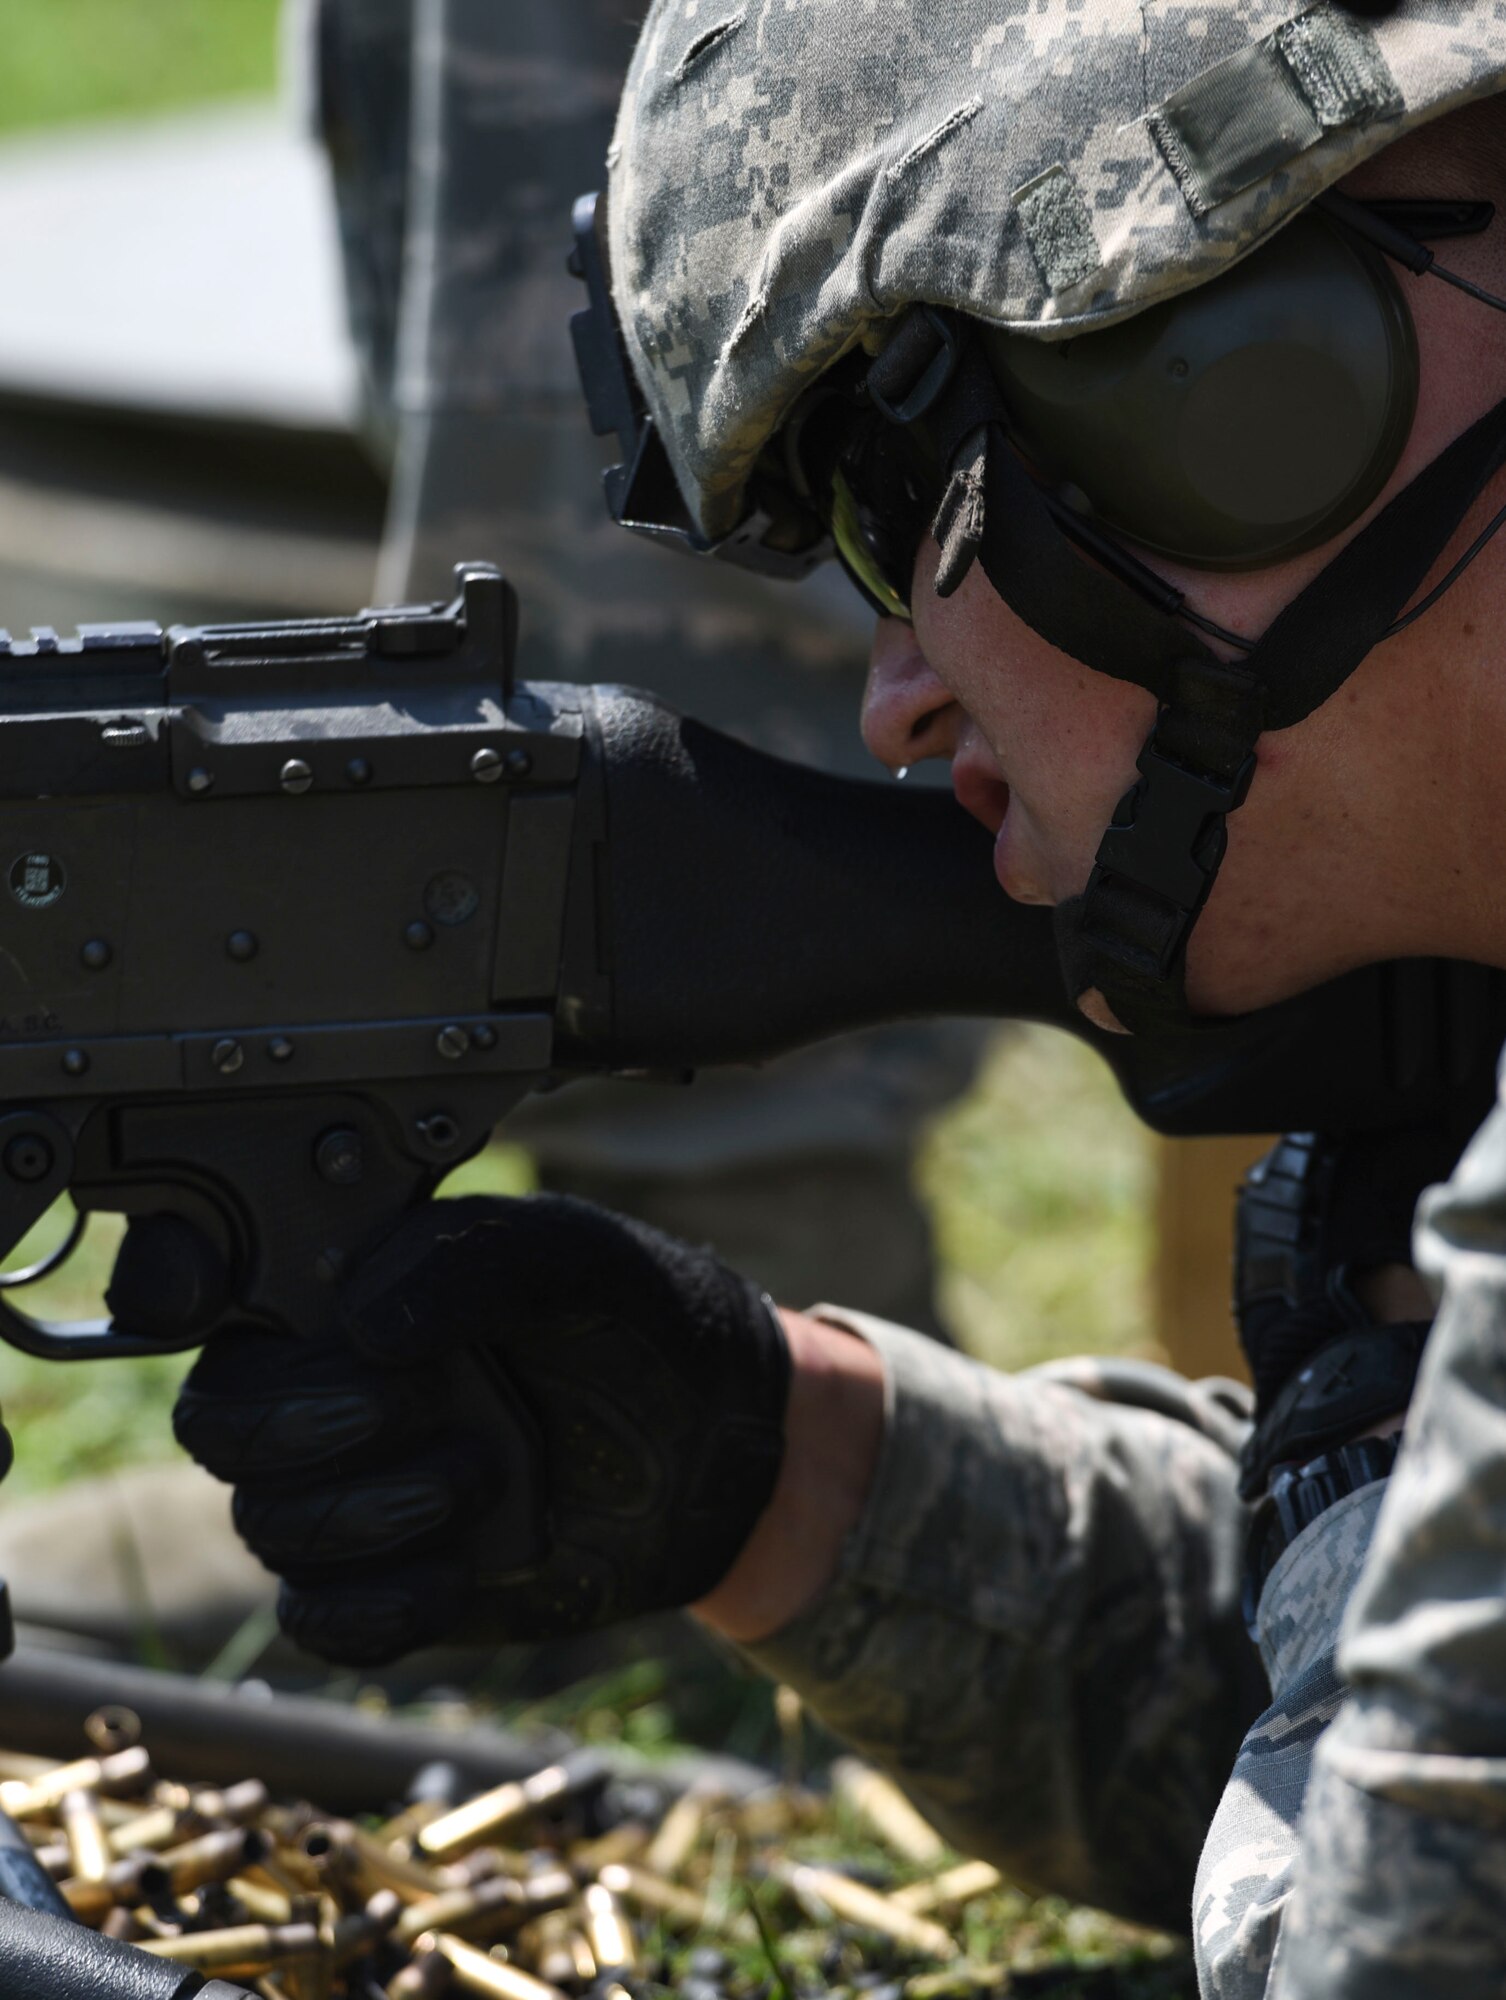 U.S. Air Force Airman 1st Class Joshua Snyder, Security Forces Specialist, 171st Security Forces Squadron, fires a 249 machine gun during a weapons qualification at Camp Dawson, W. Va., Aug. 6, 2018. Guardsmen from the 171SFS, located at the 171st Air Refueling Wing near Pittsburgh, traveled to Camp Dawson, August 5-8, 2018, to familiarize and qualify on the 240B and 249 machine guns. (U.S. Air National Guard photo by Tech. Sgt. Allyson L. Manners)